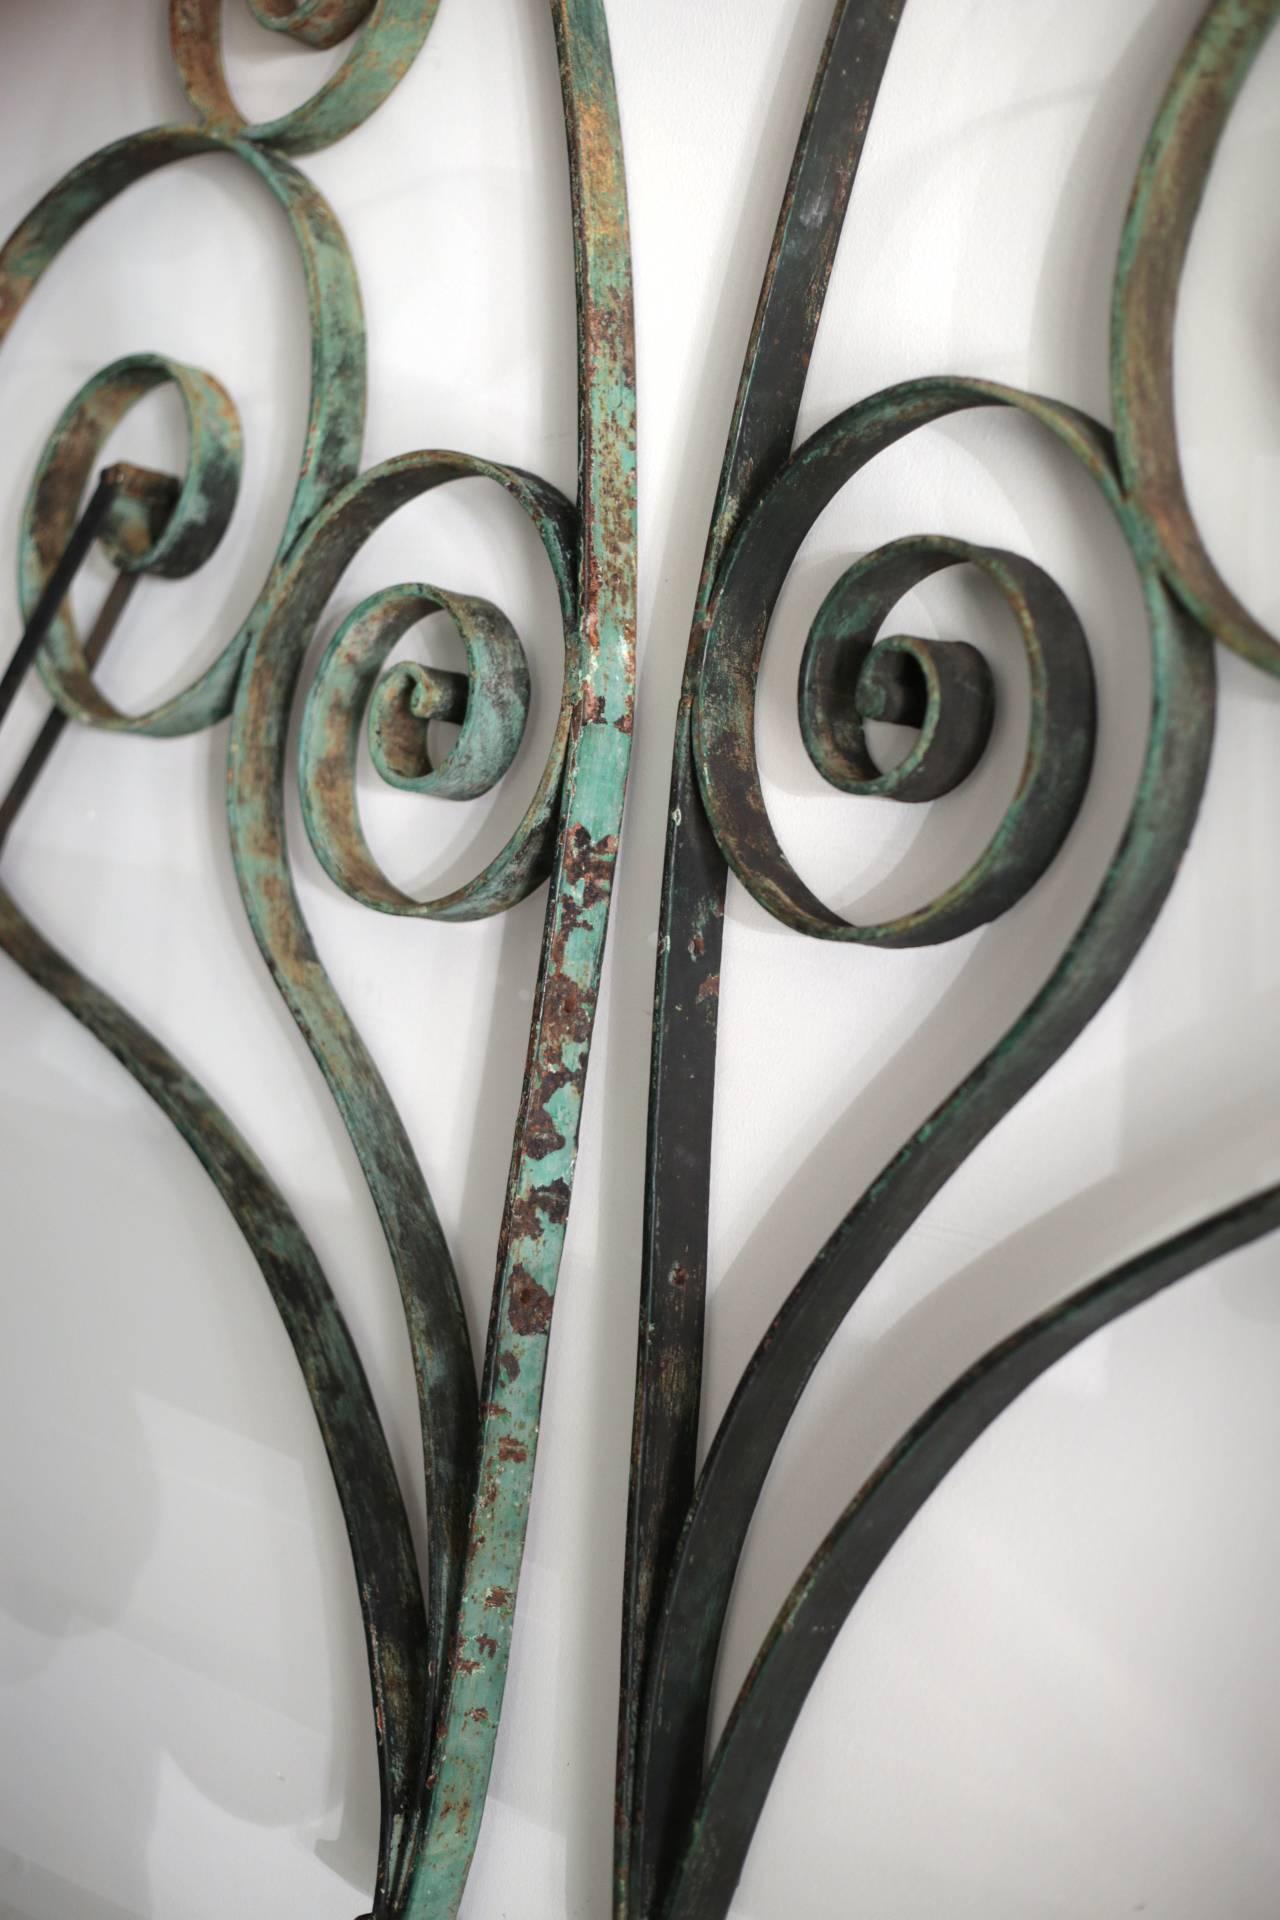 A pair of distressed green steel French awing brackets. The metal is intact with screw holes and a metal bar to attach the awning.